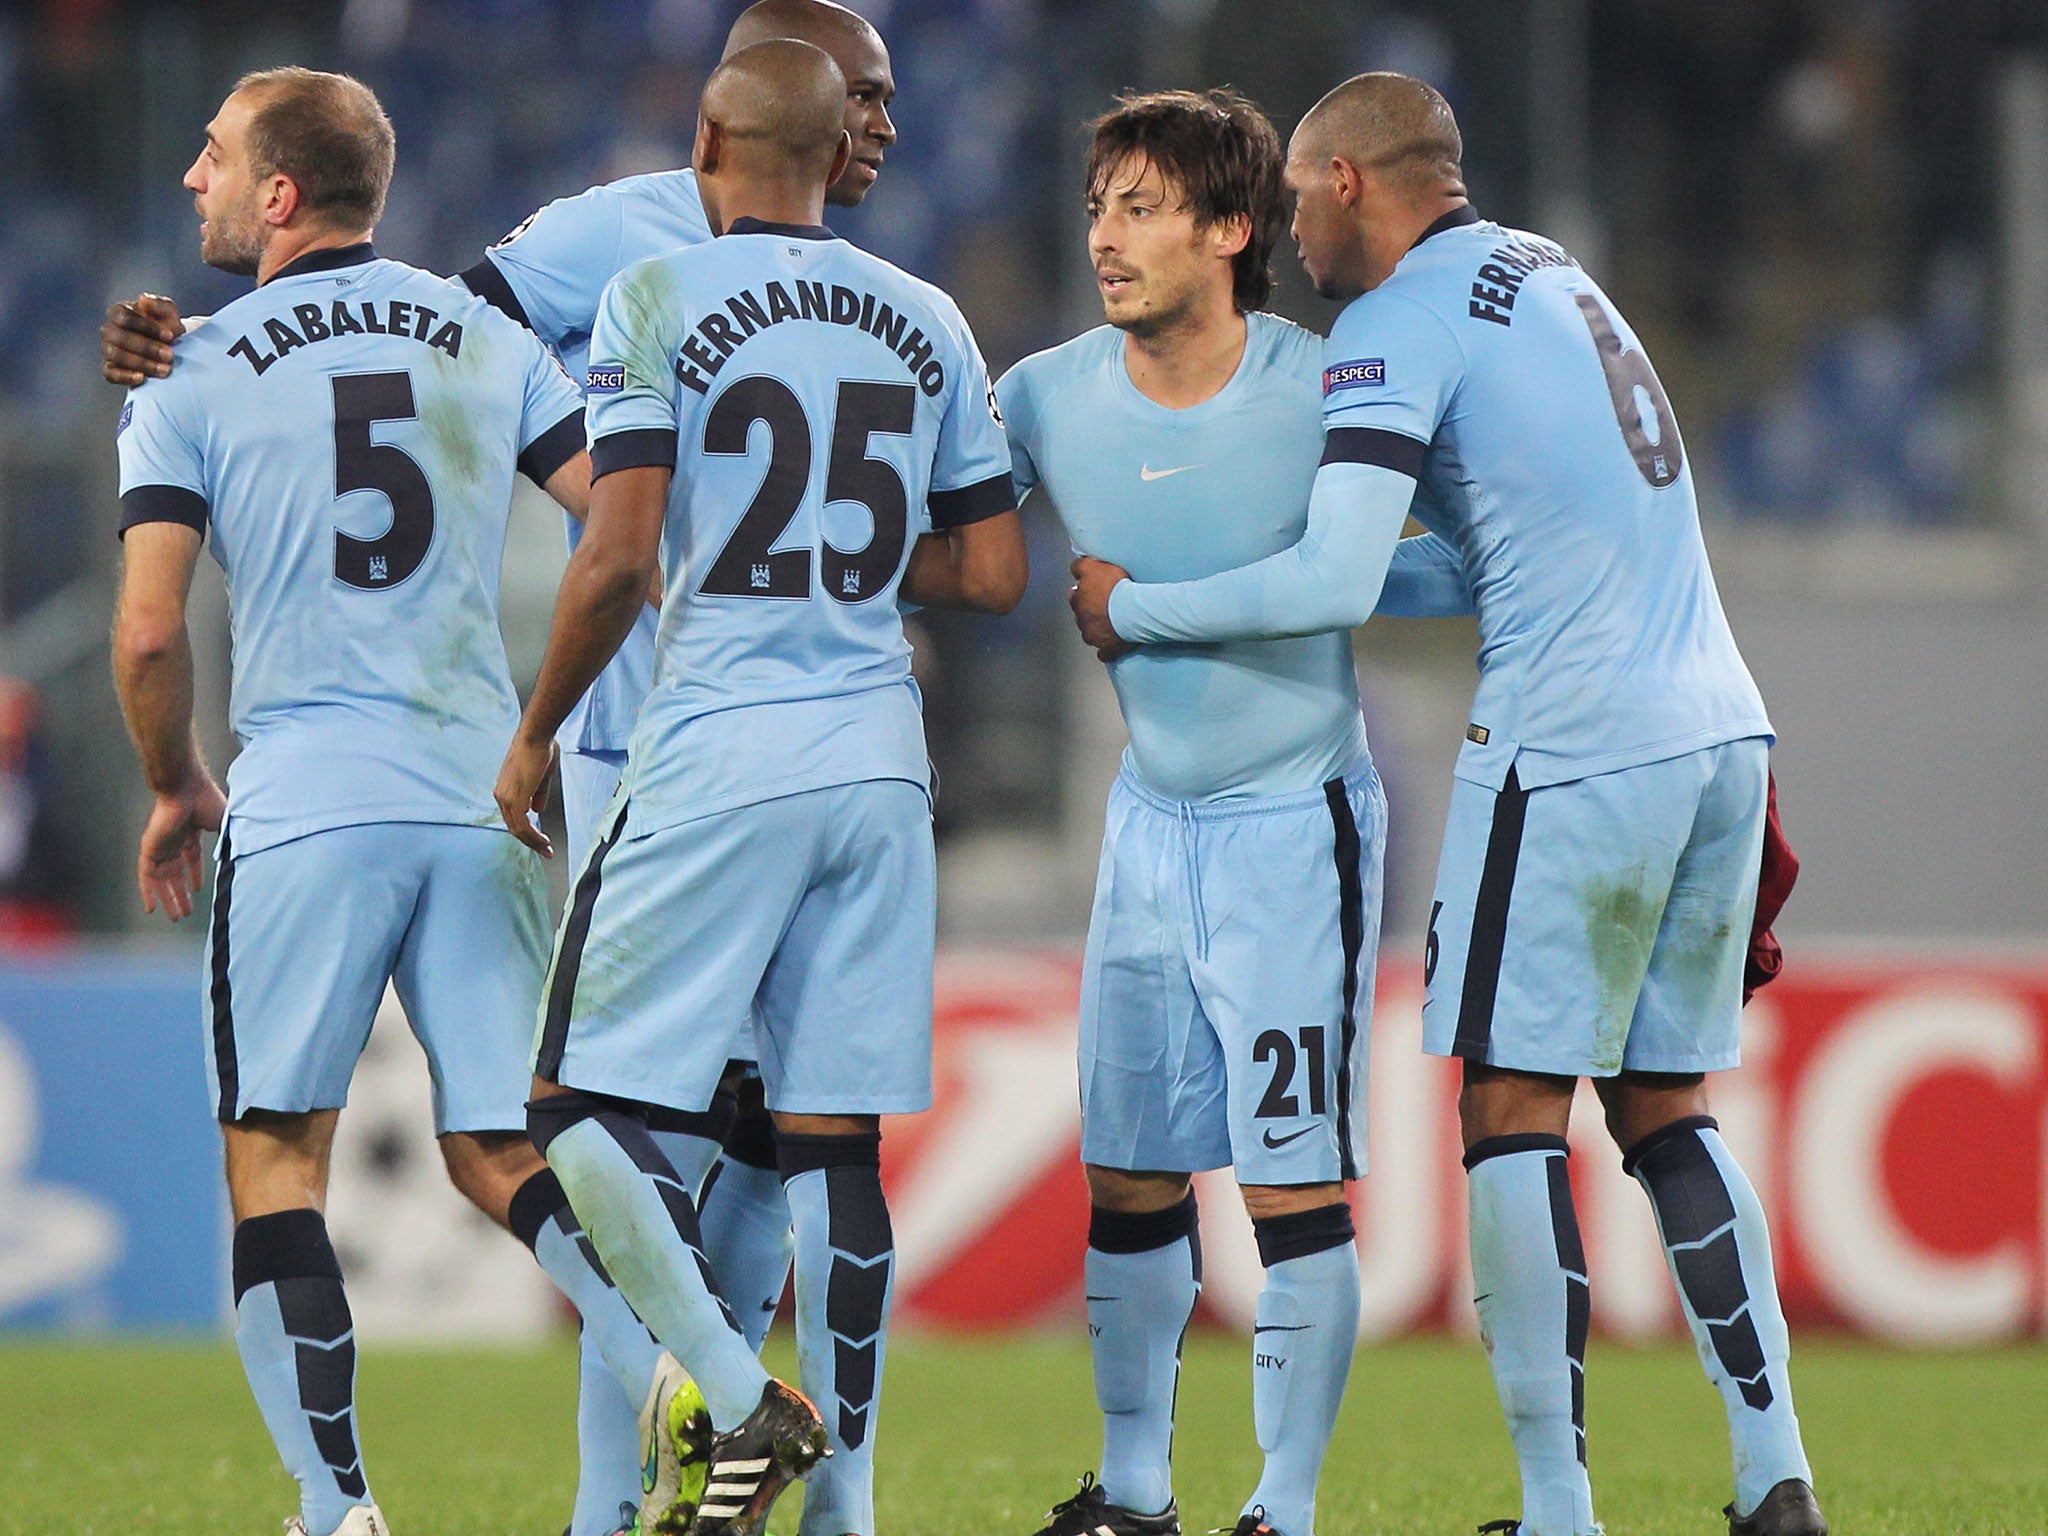 Fernando (right) and Fernandinho (centre) were lauded for their performance for City against Roma